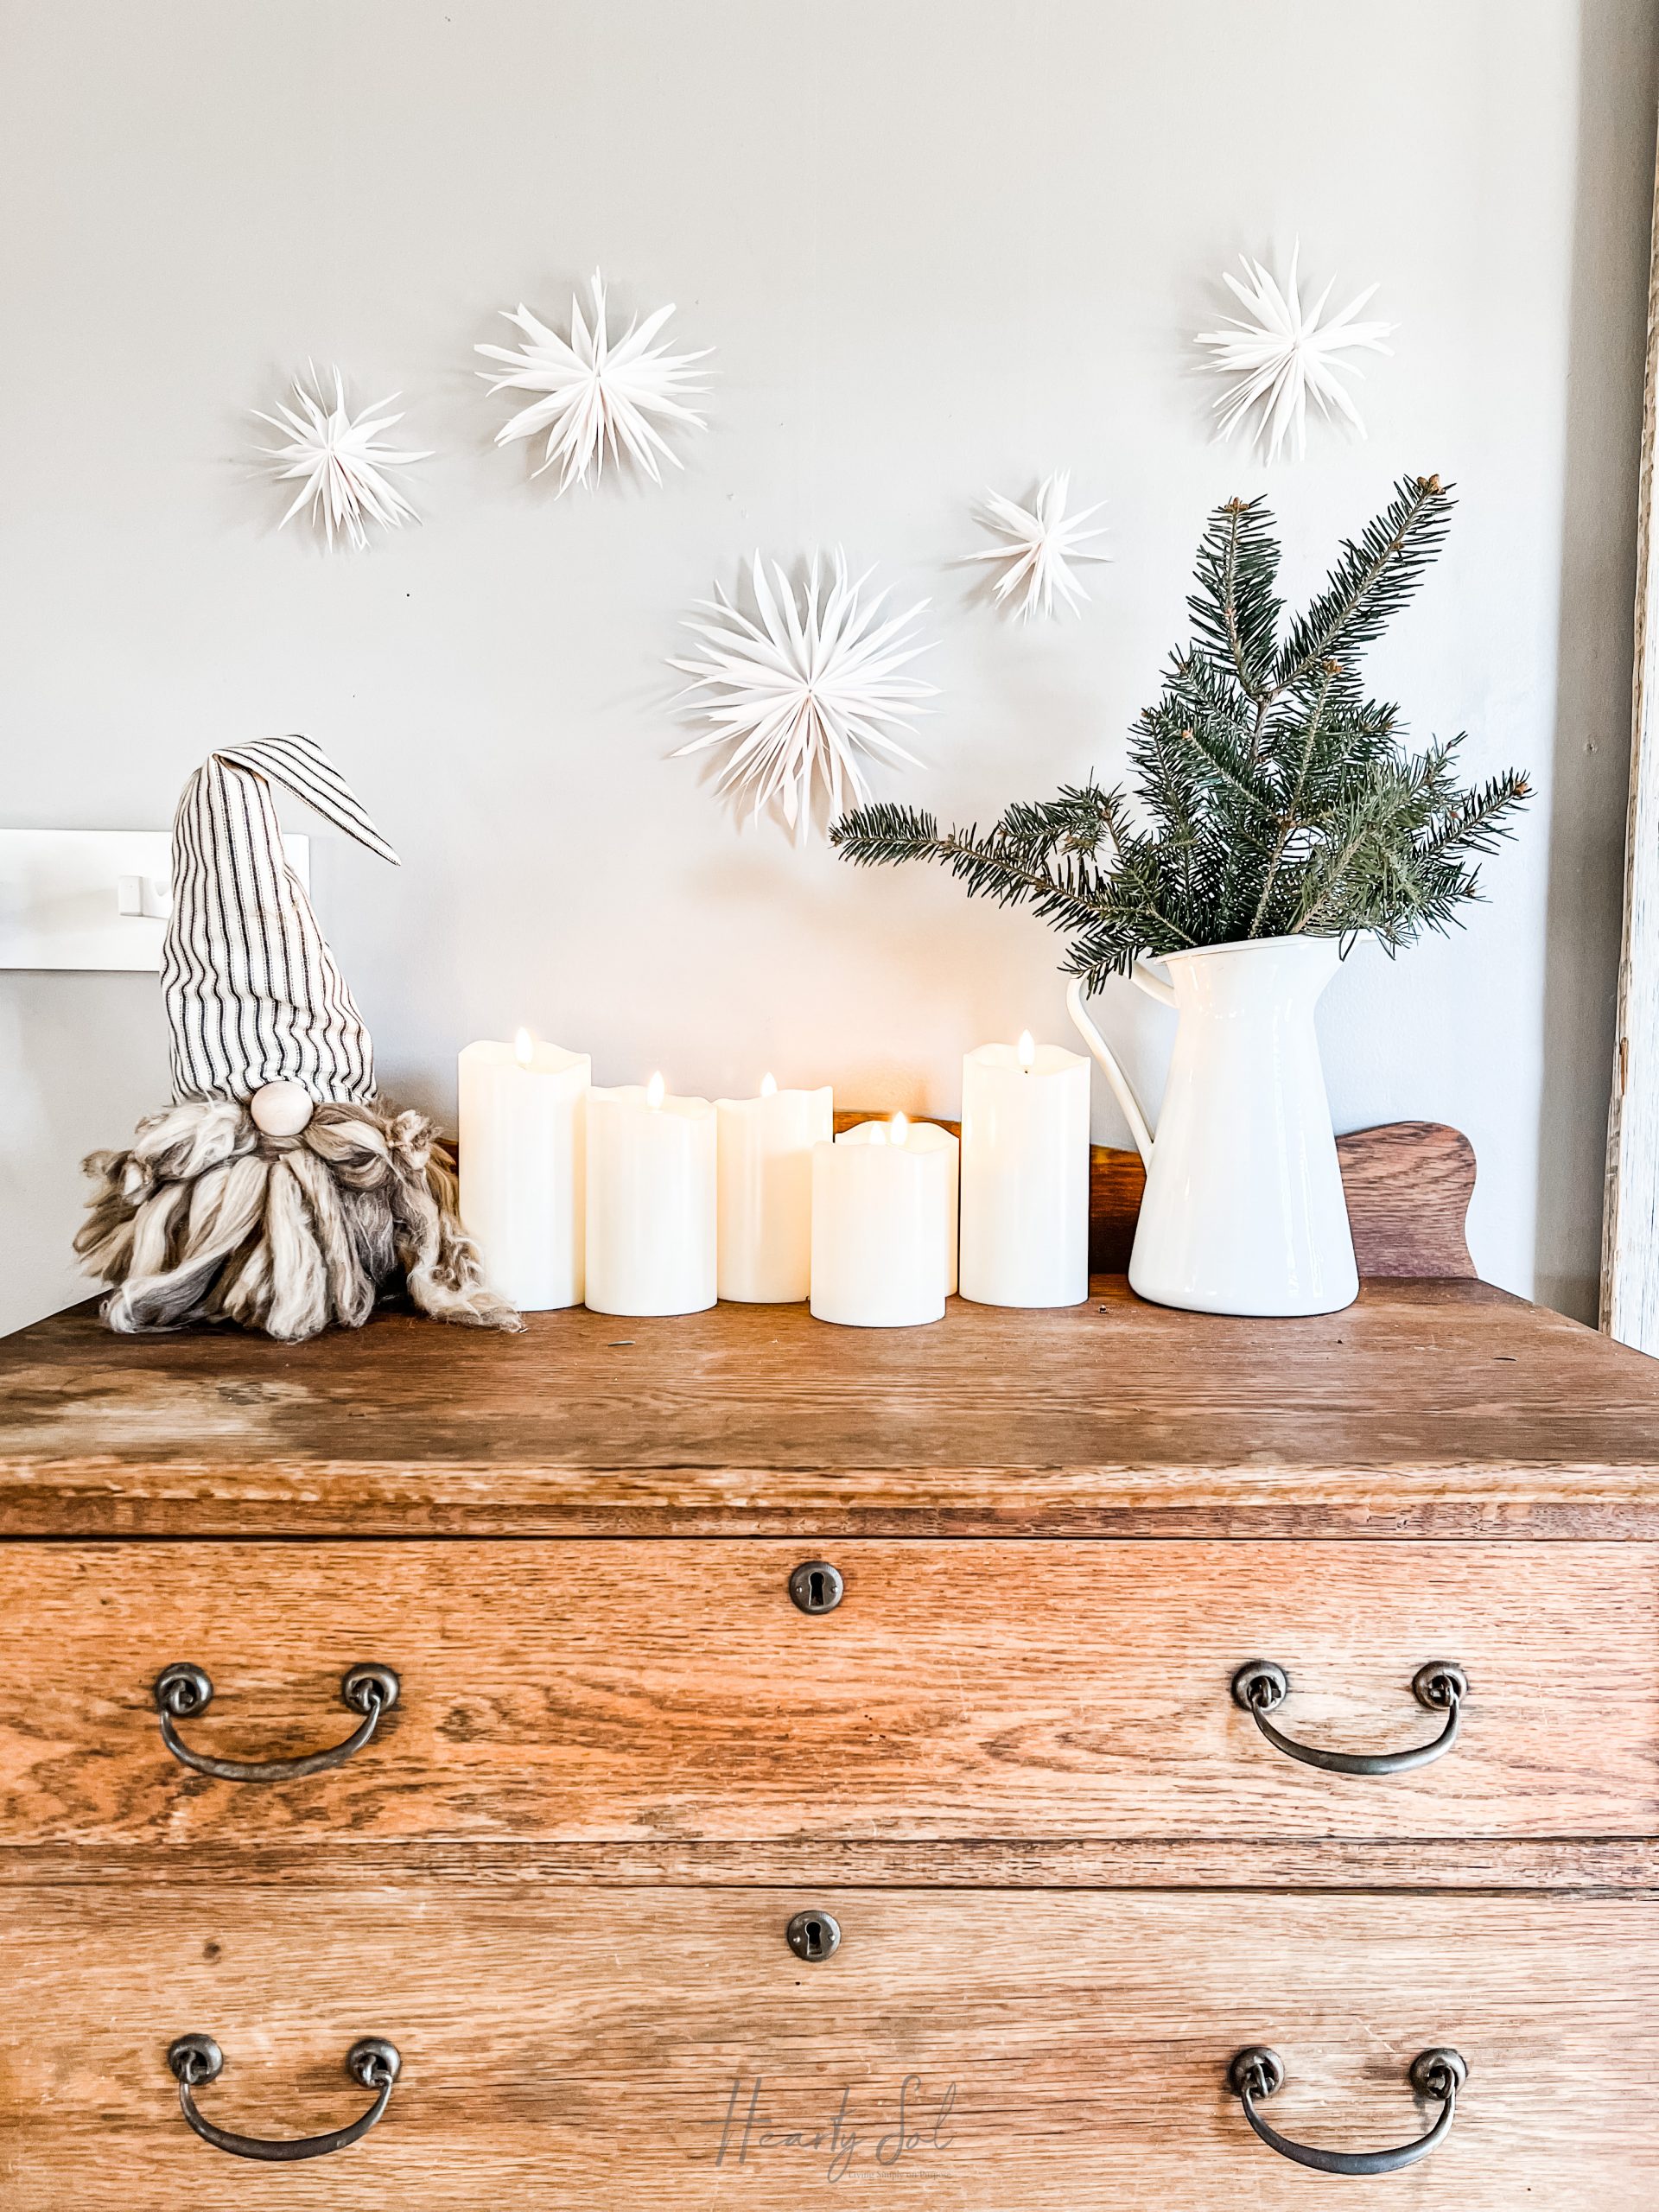 wooden dresser with candles, gnome, white pitcher with greenery in it and 5 white stars on the wall